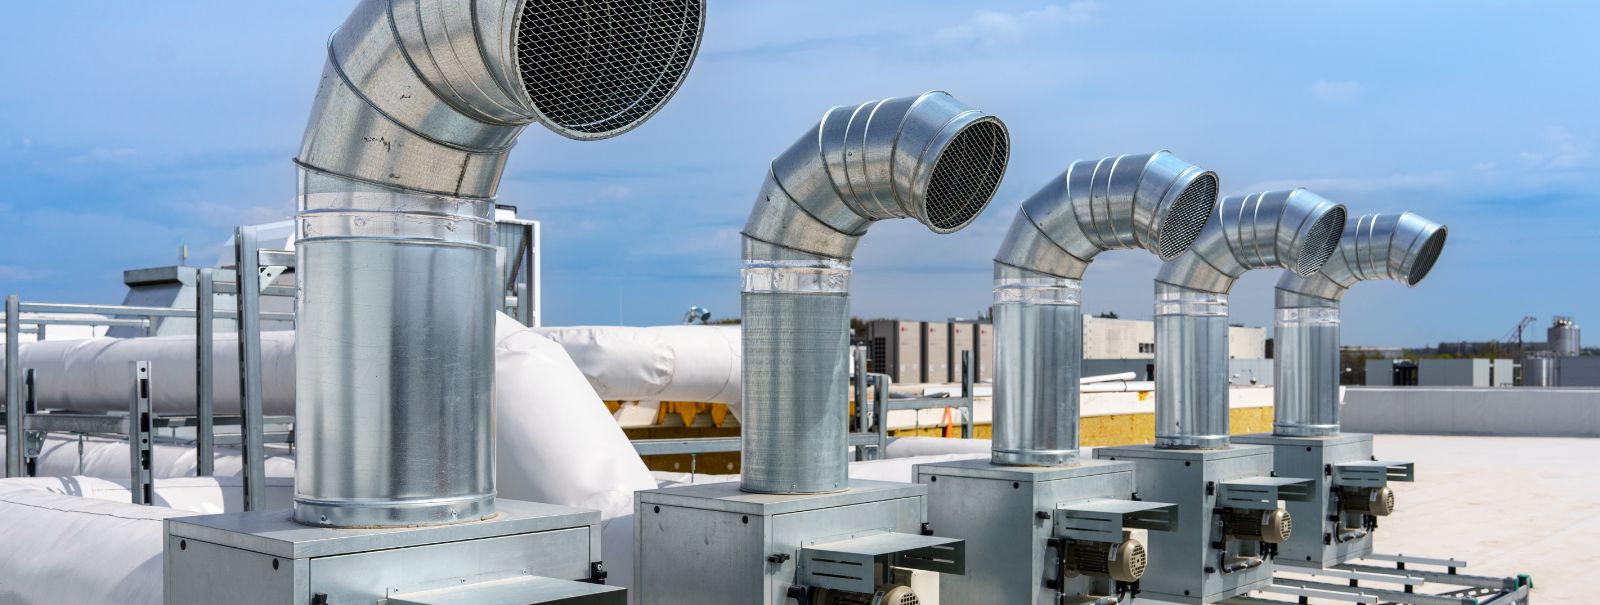 Ventilation system automation involves the use of advanced control systems to regulate air flow, temperature, and humidity levels within a building. By leveragi